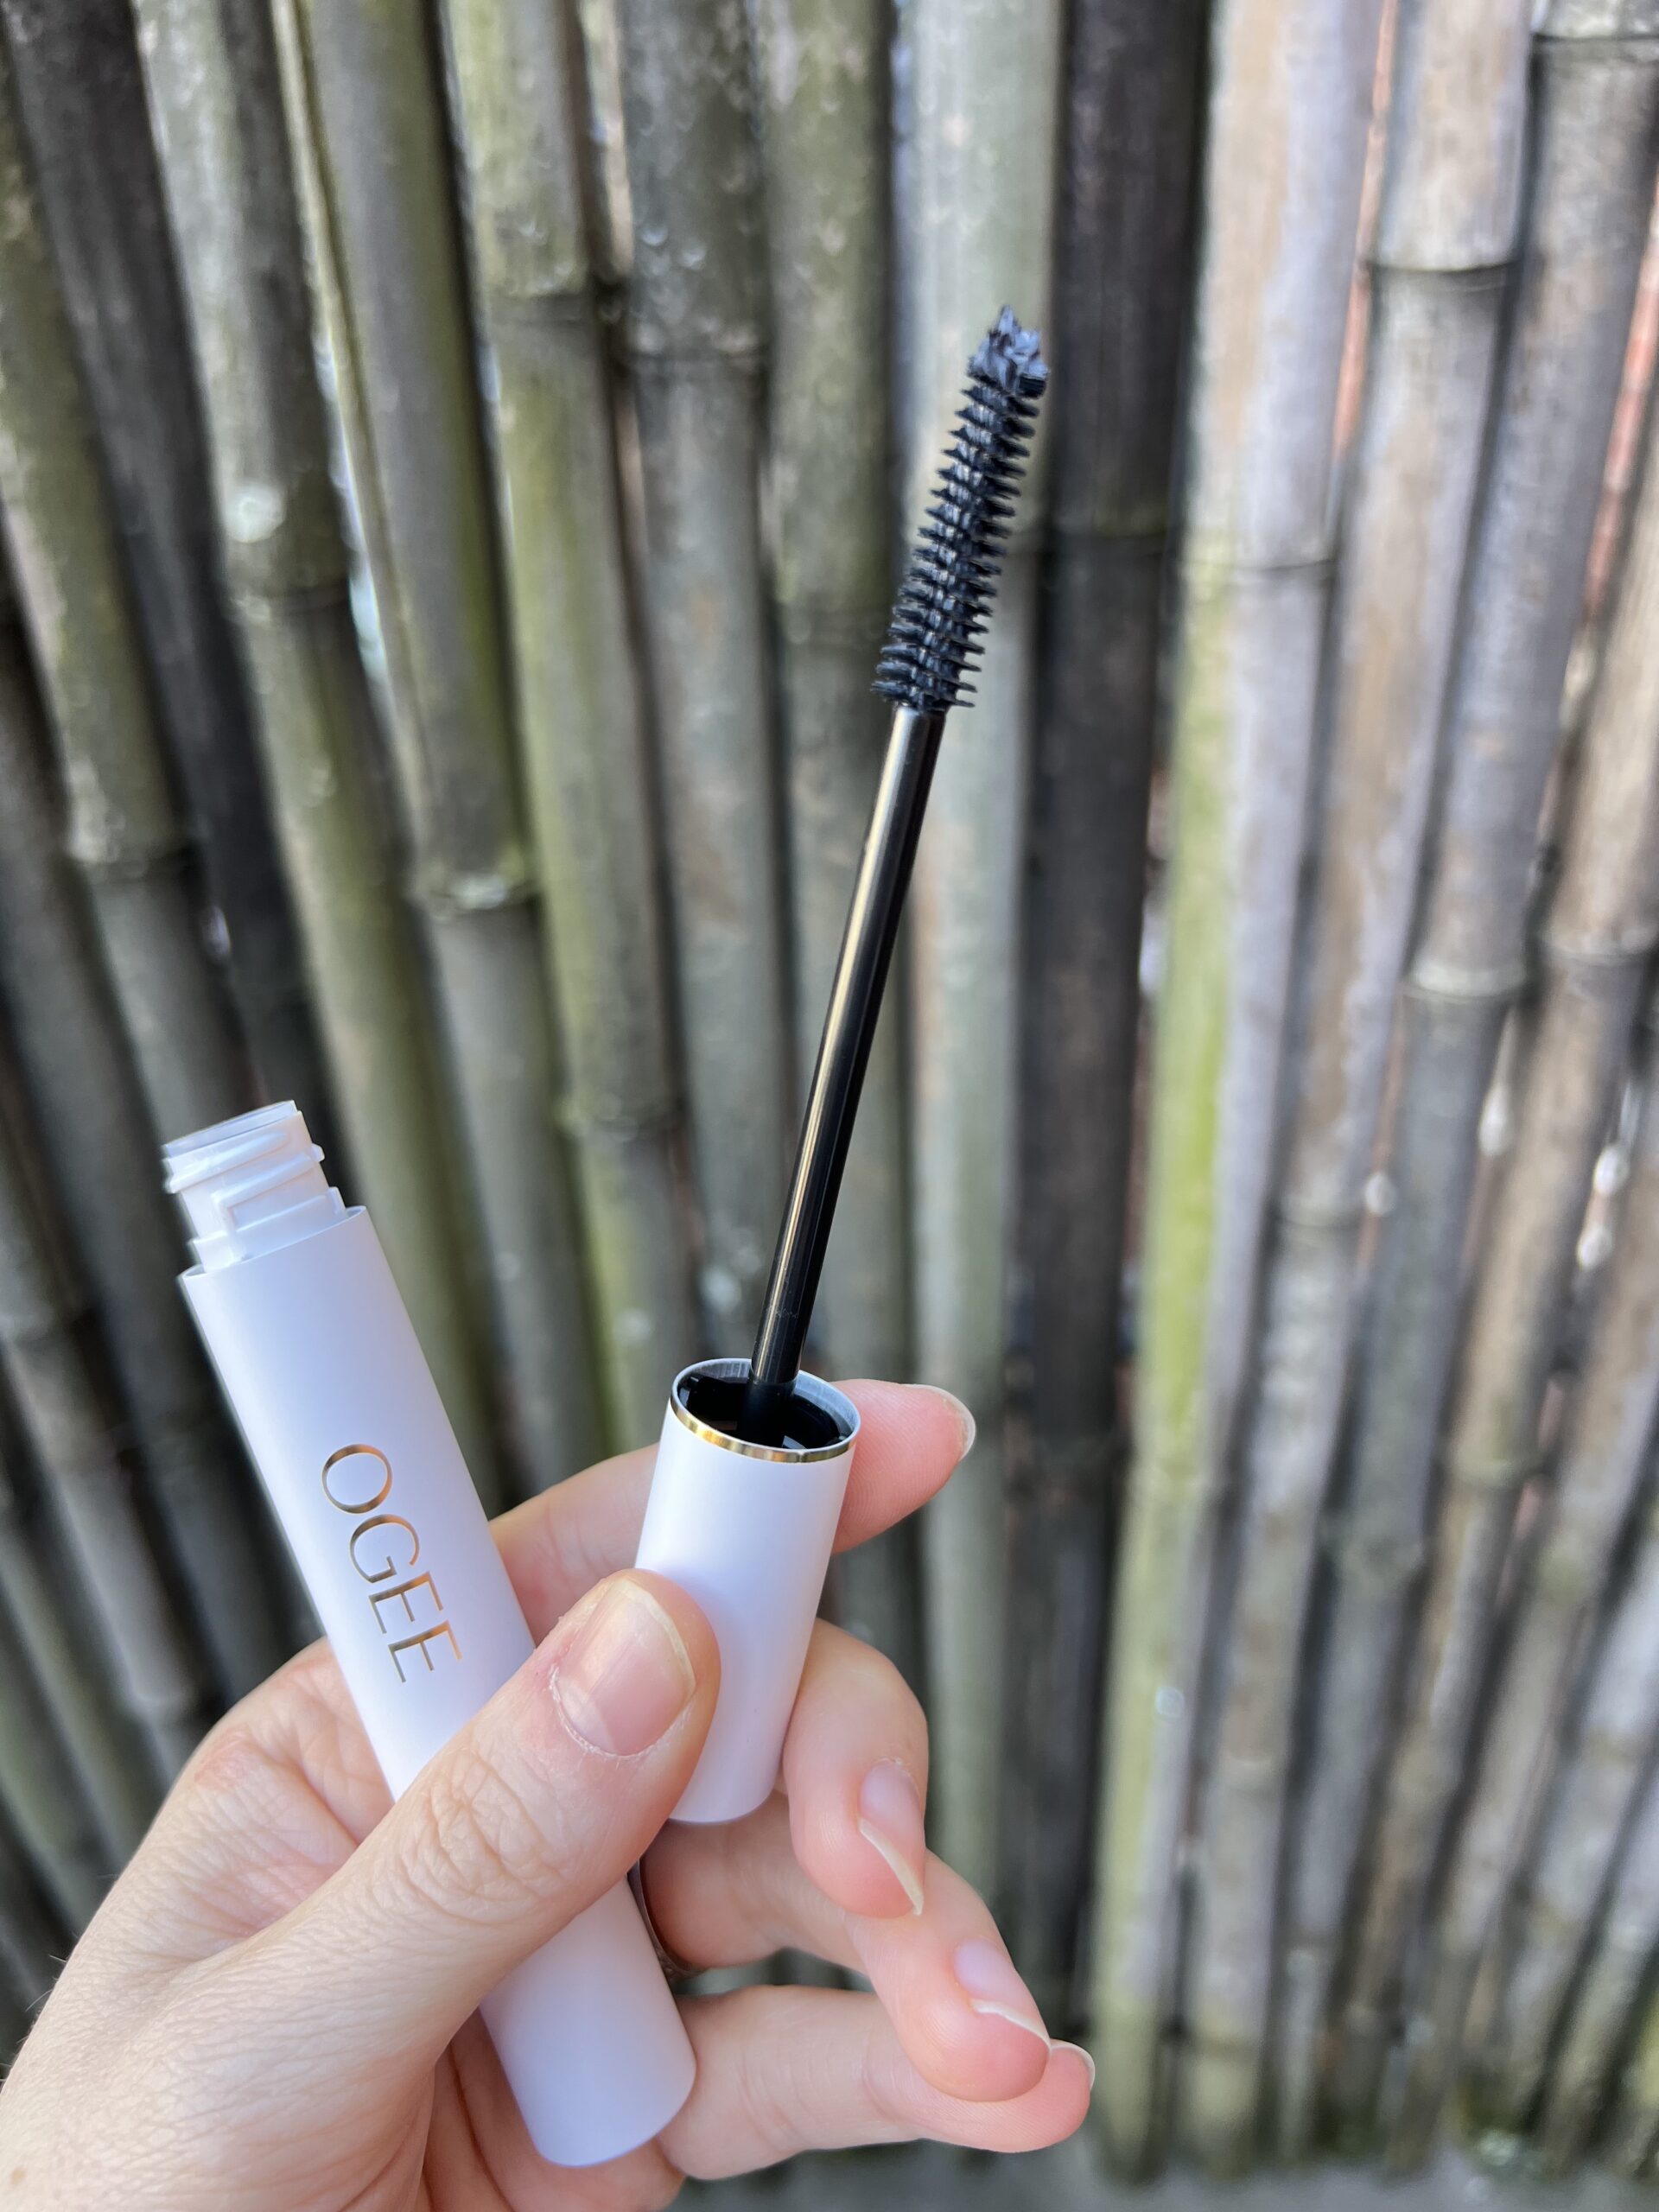 My Honest Ogee Makeup Review - The Daley Dose